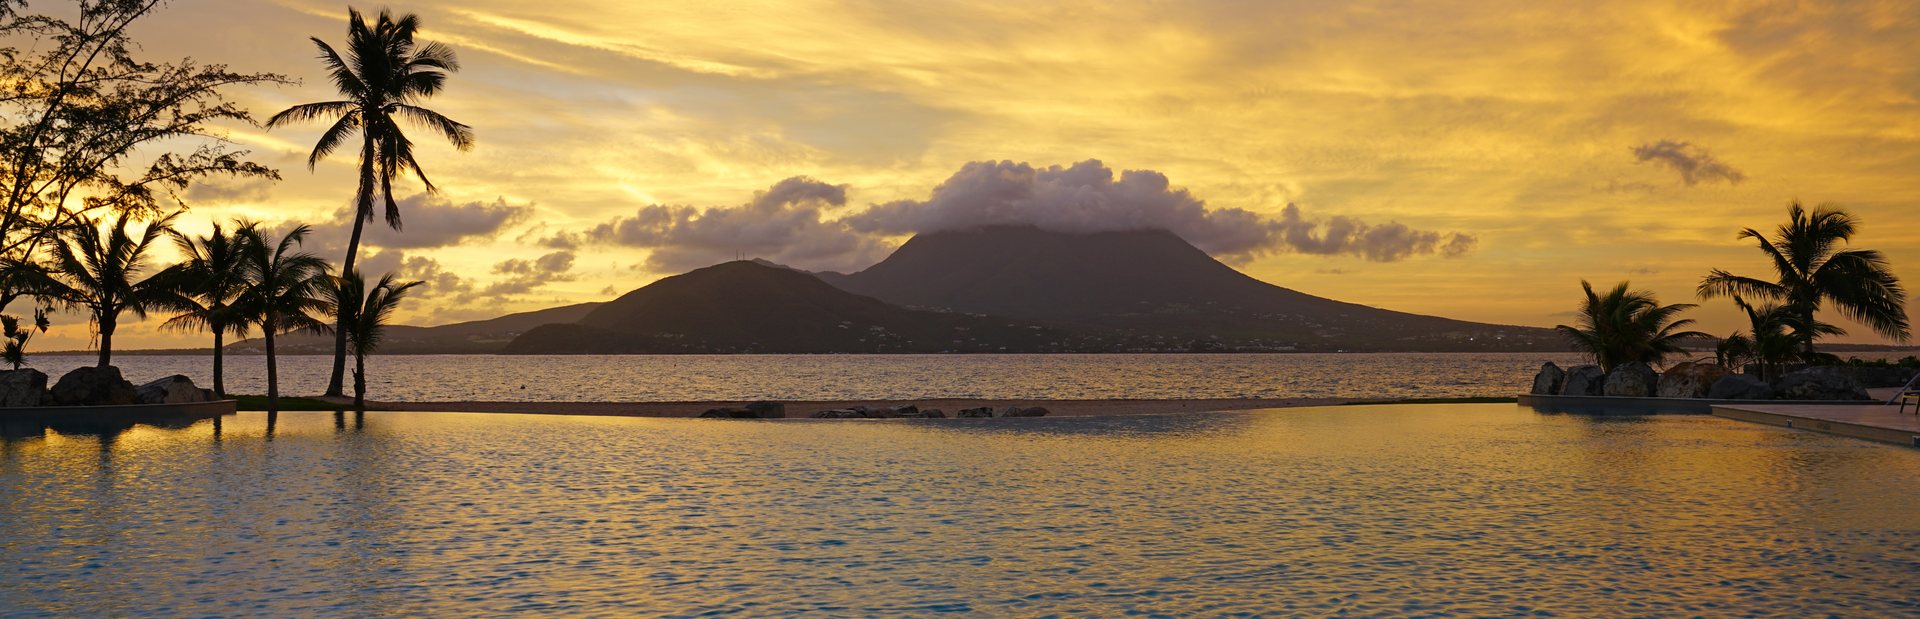 St Kitts and Nevis photo tour